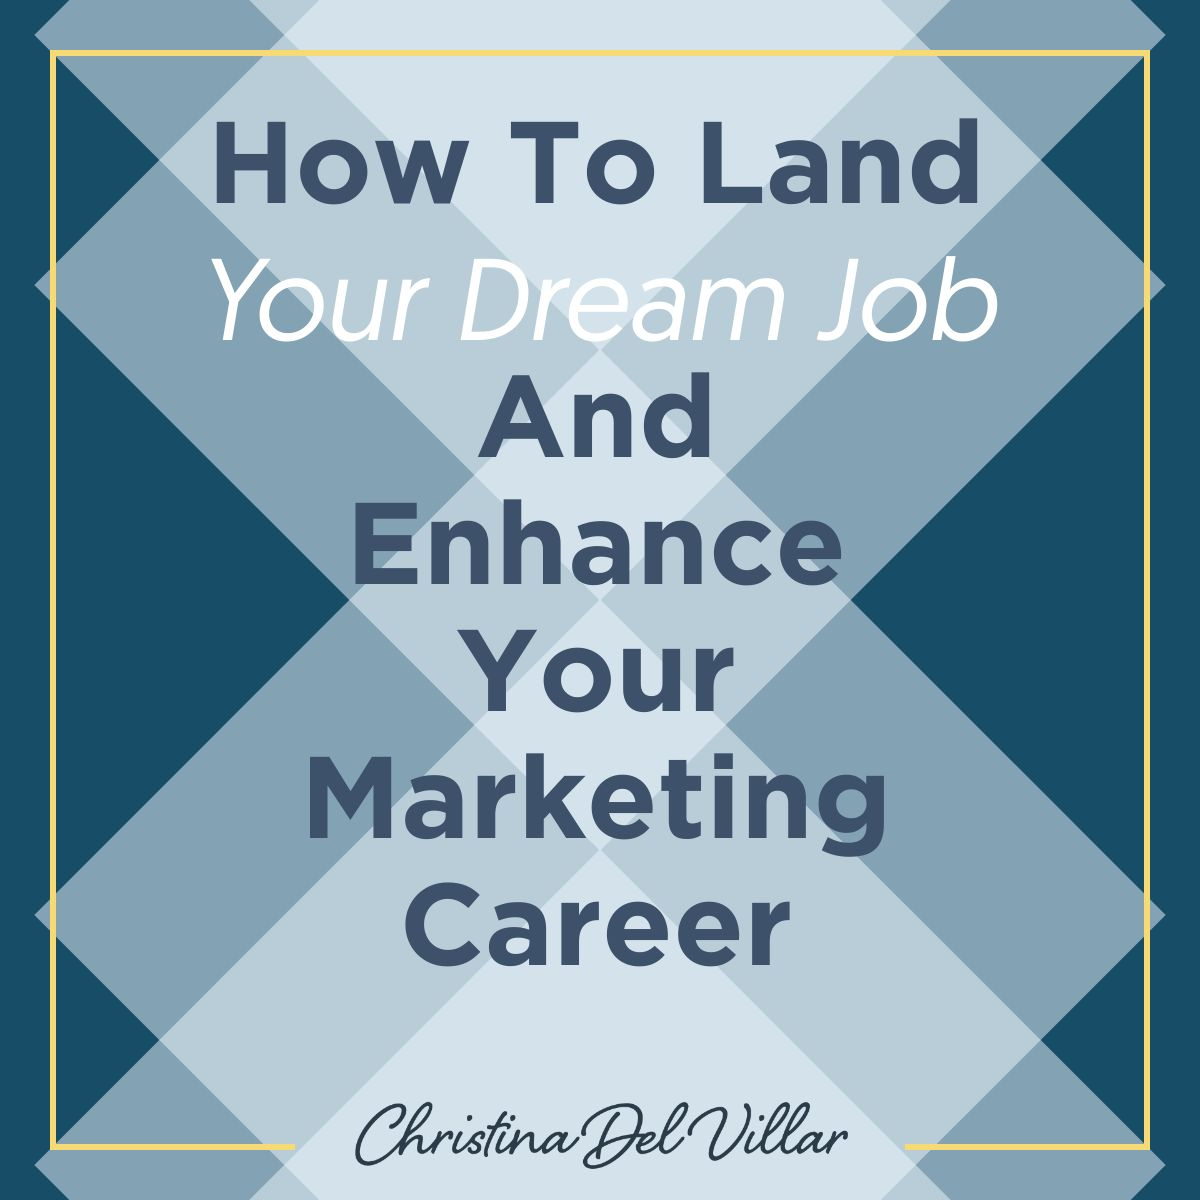 How To Land Your Dream Job And Enhance Your Marketing Career